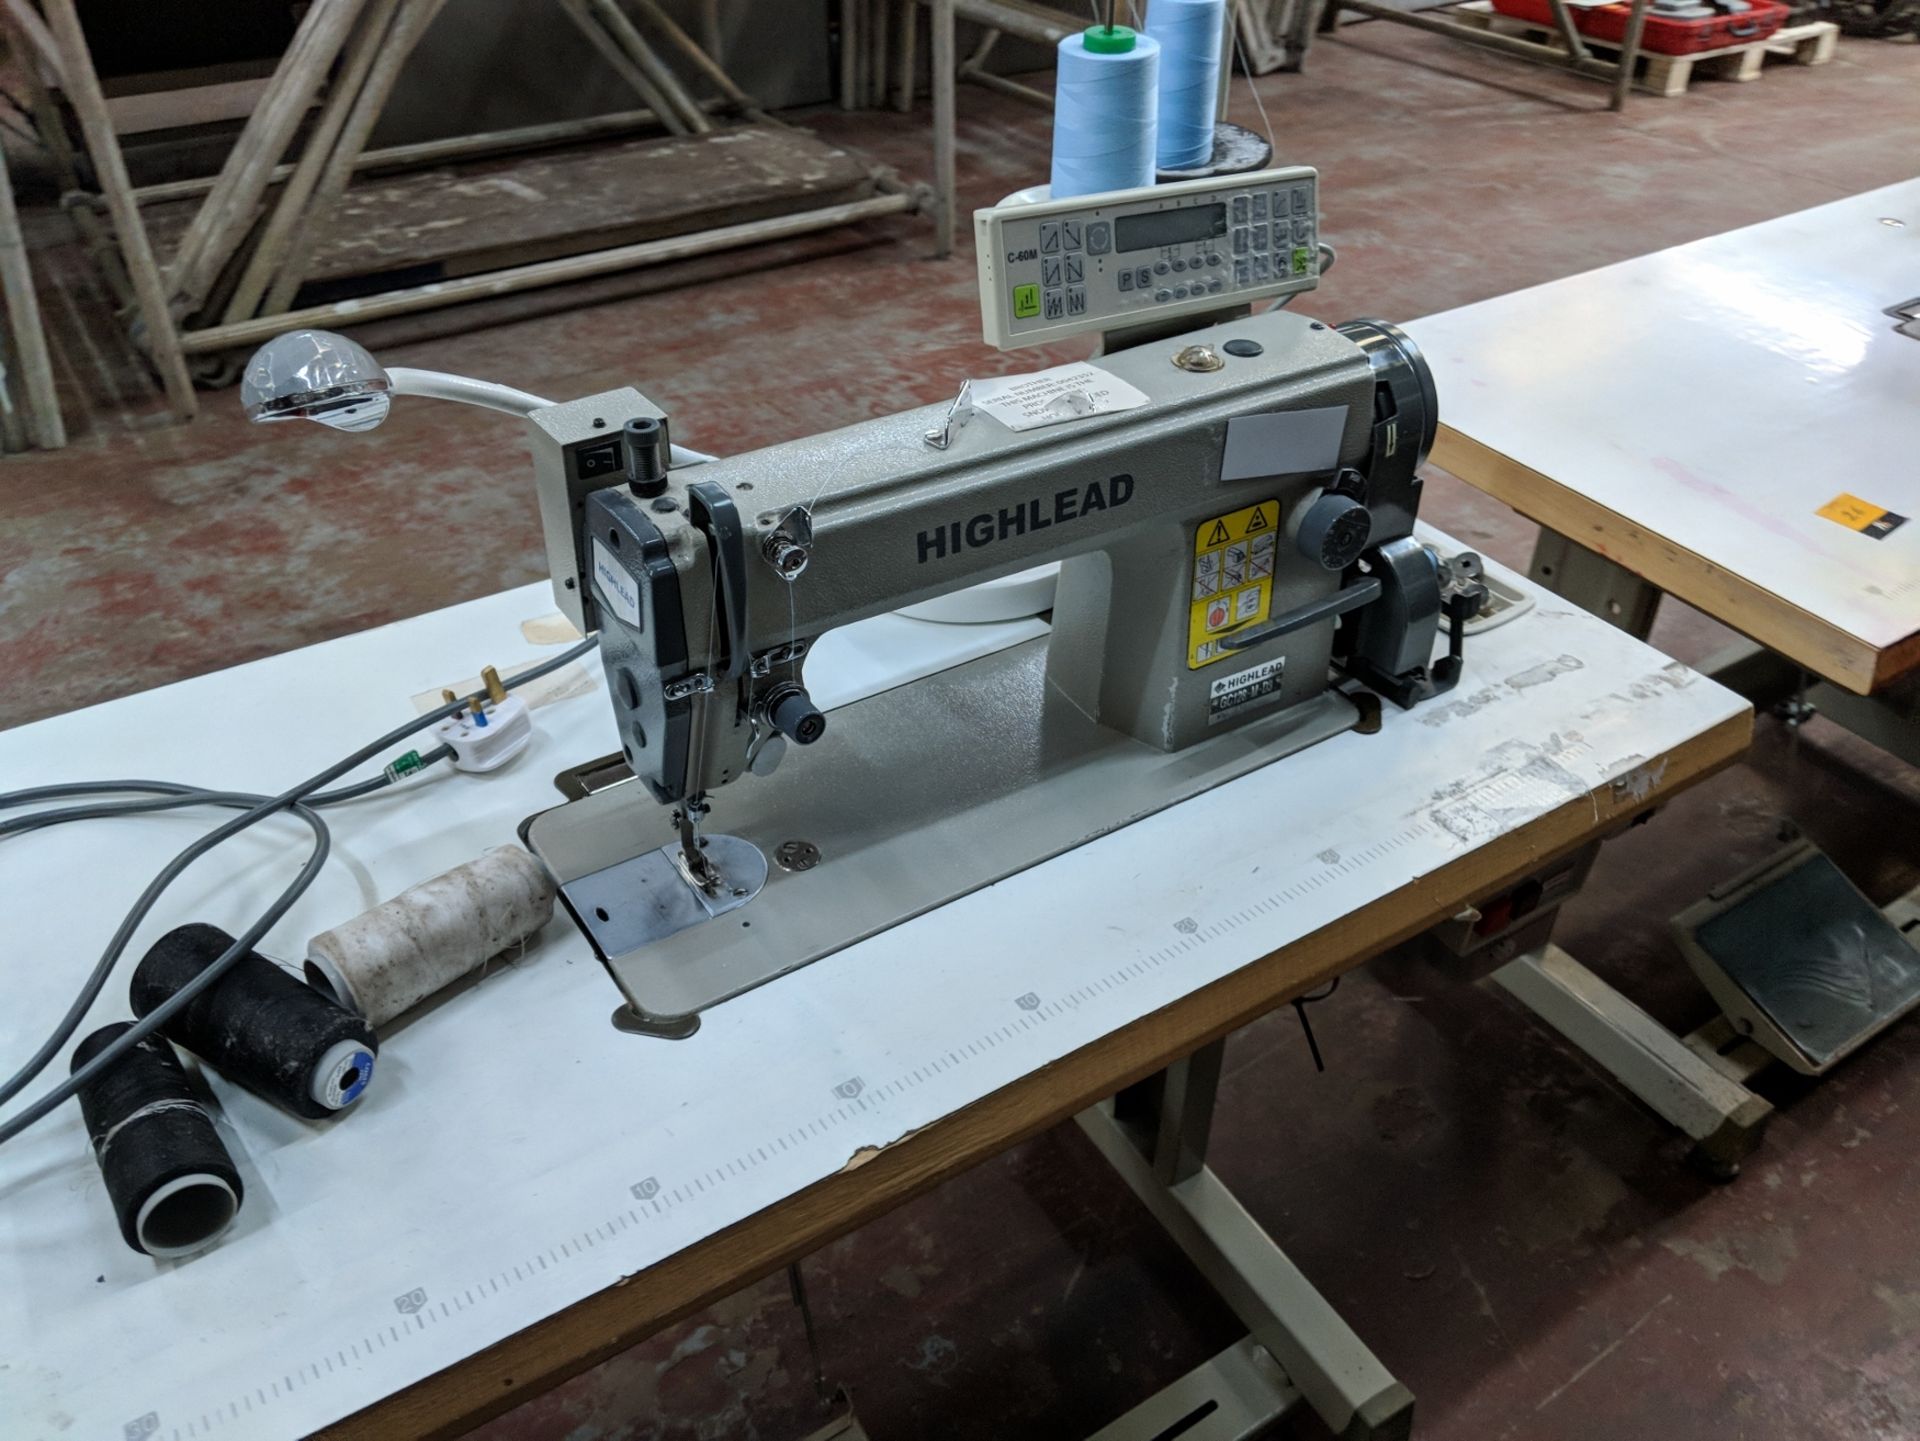 Brother/Highlead model GC128-M-D3 sewing machine including model C-60M control unit & table - Image 3 of 6